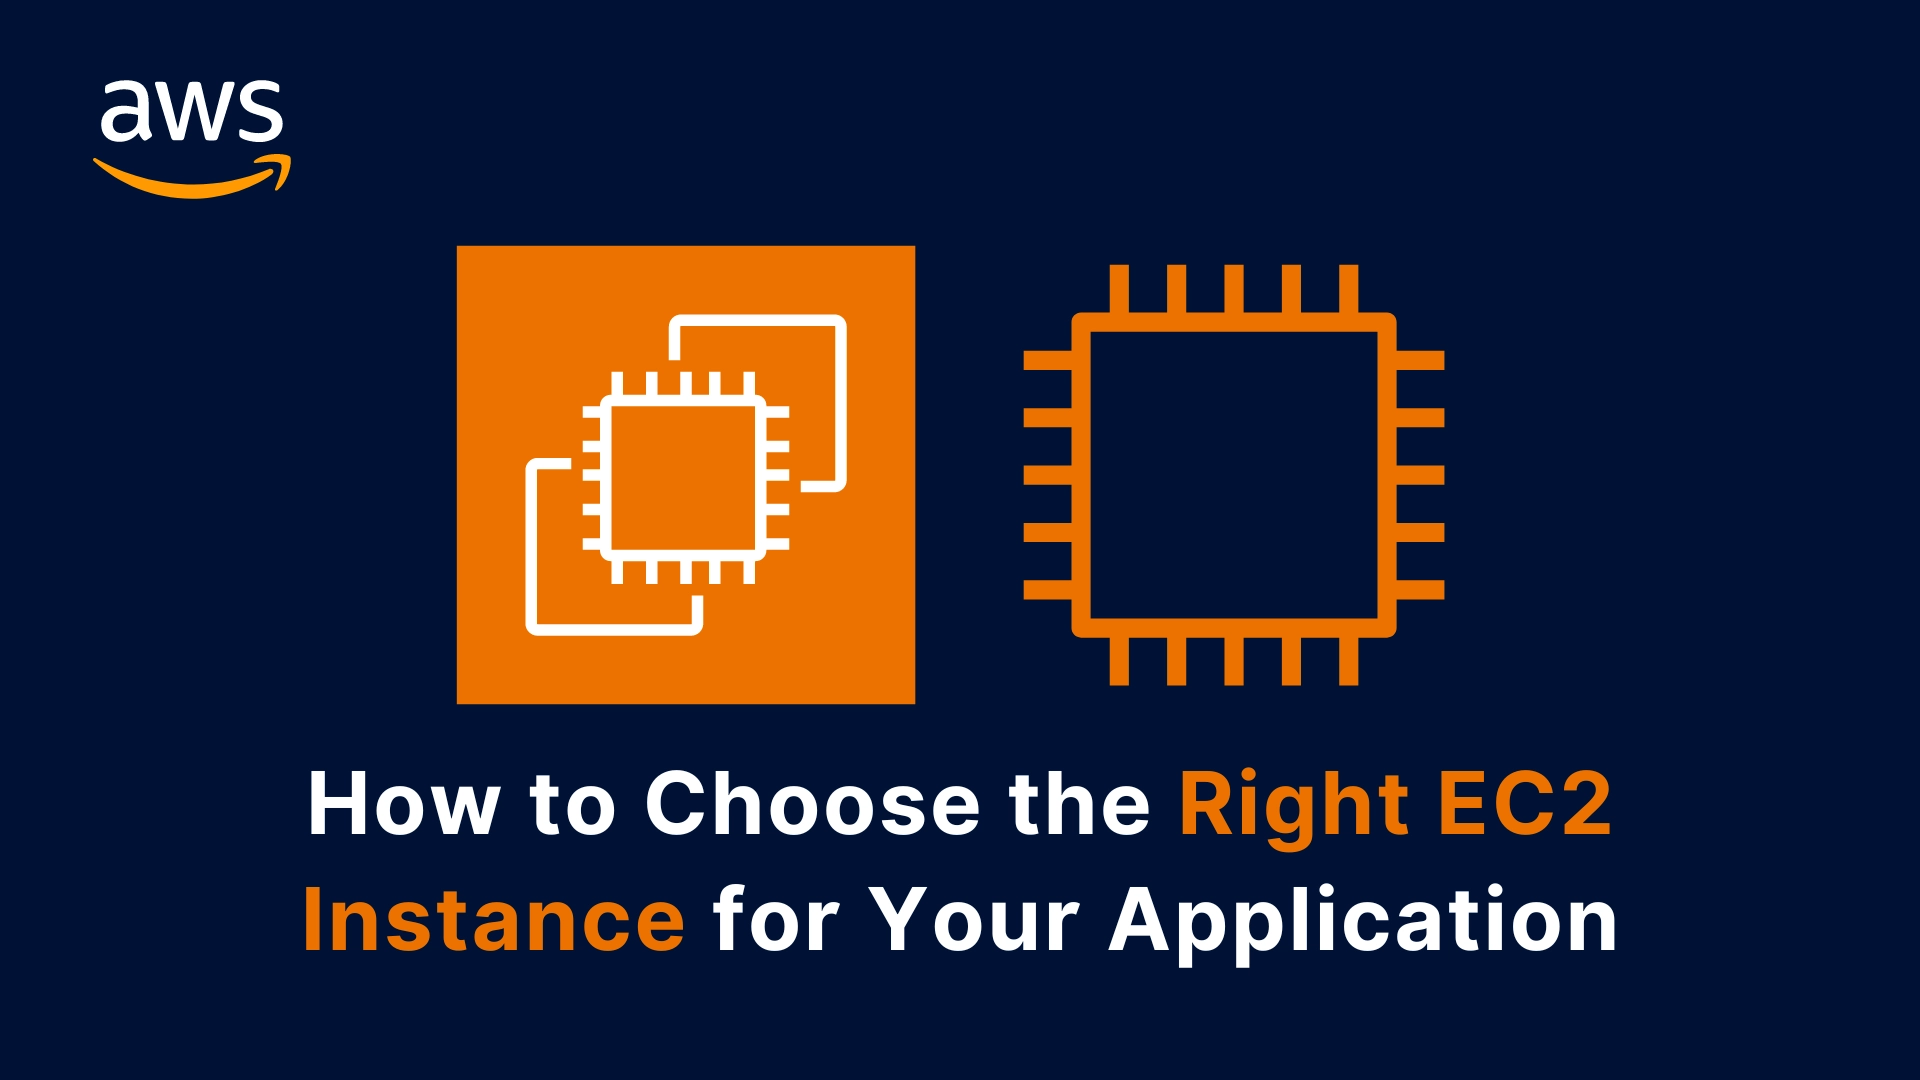 How to Choose the Right EC2 Instance for Your Application